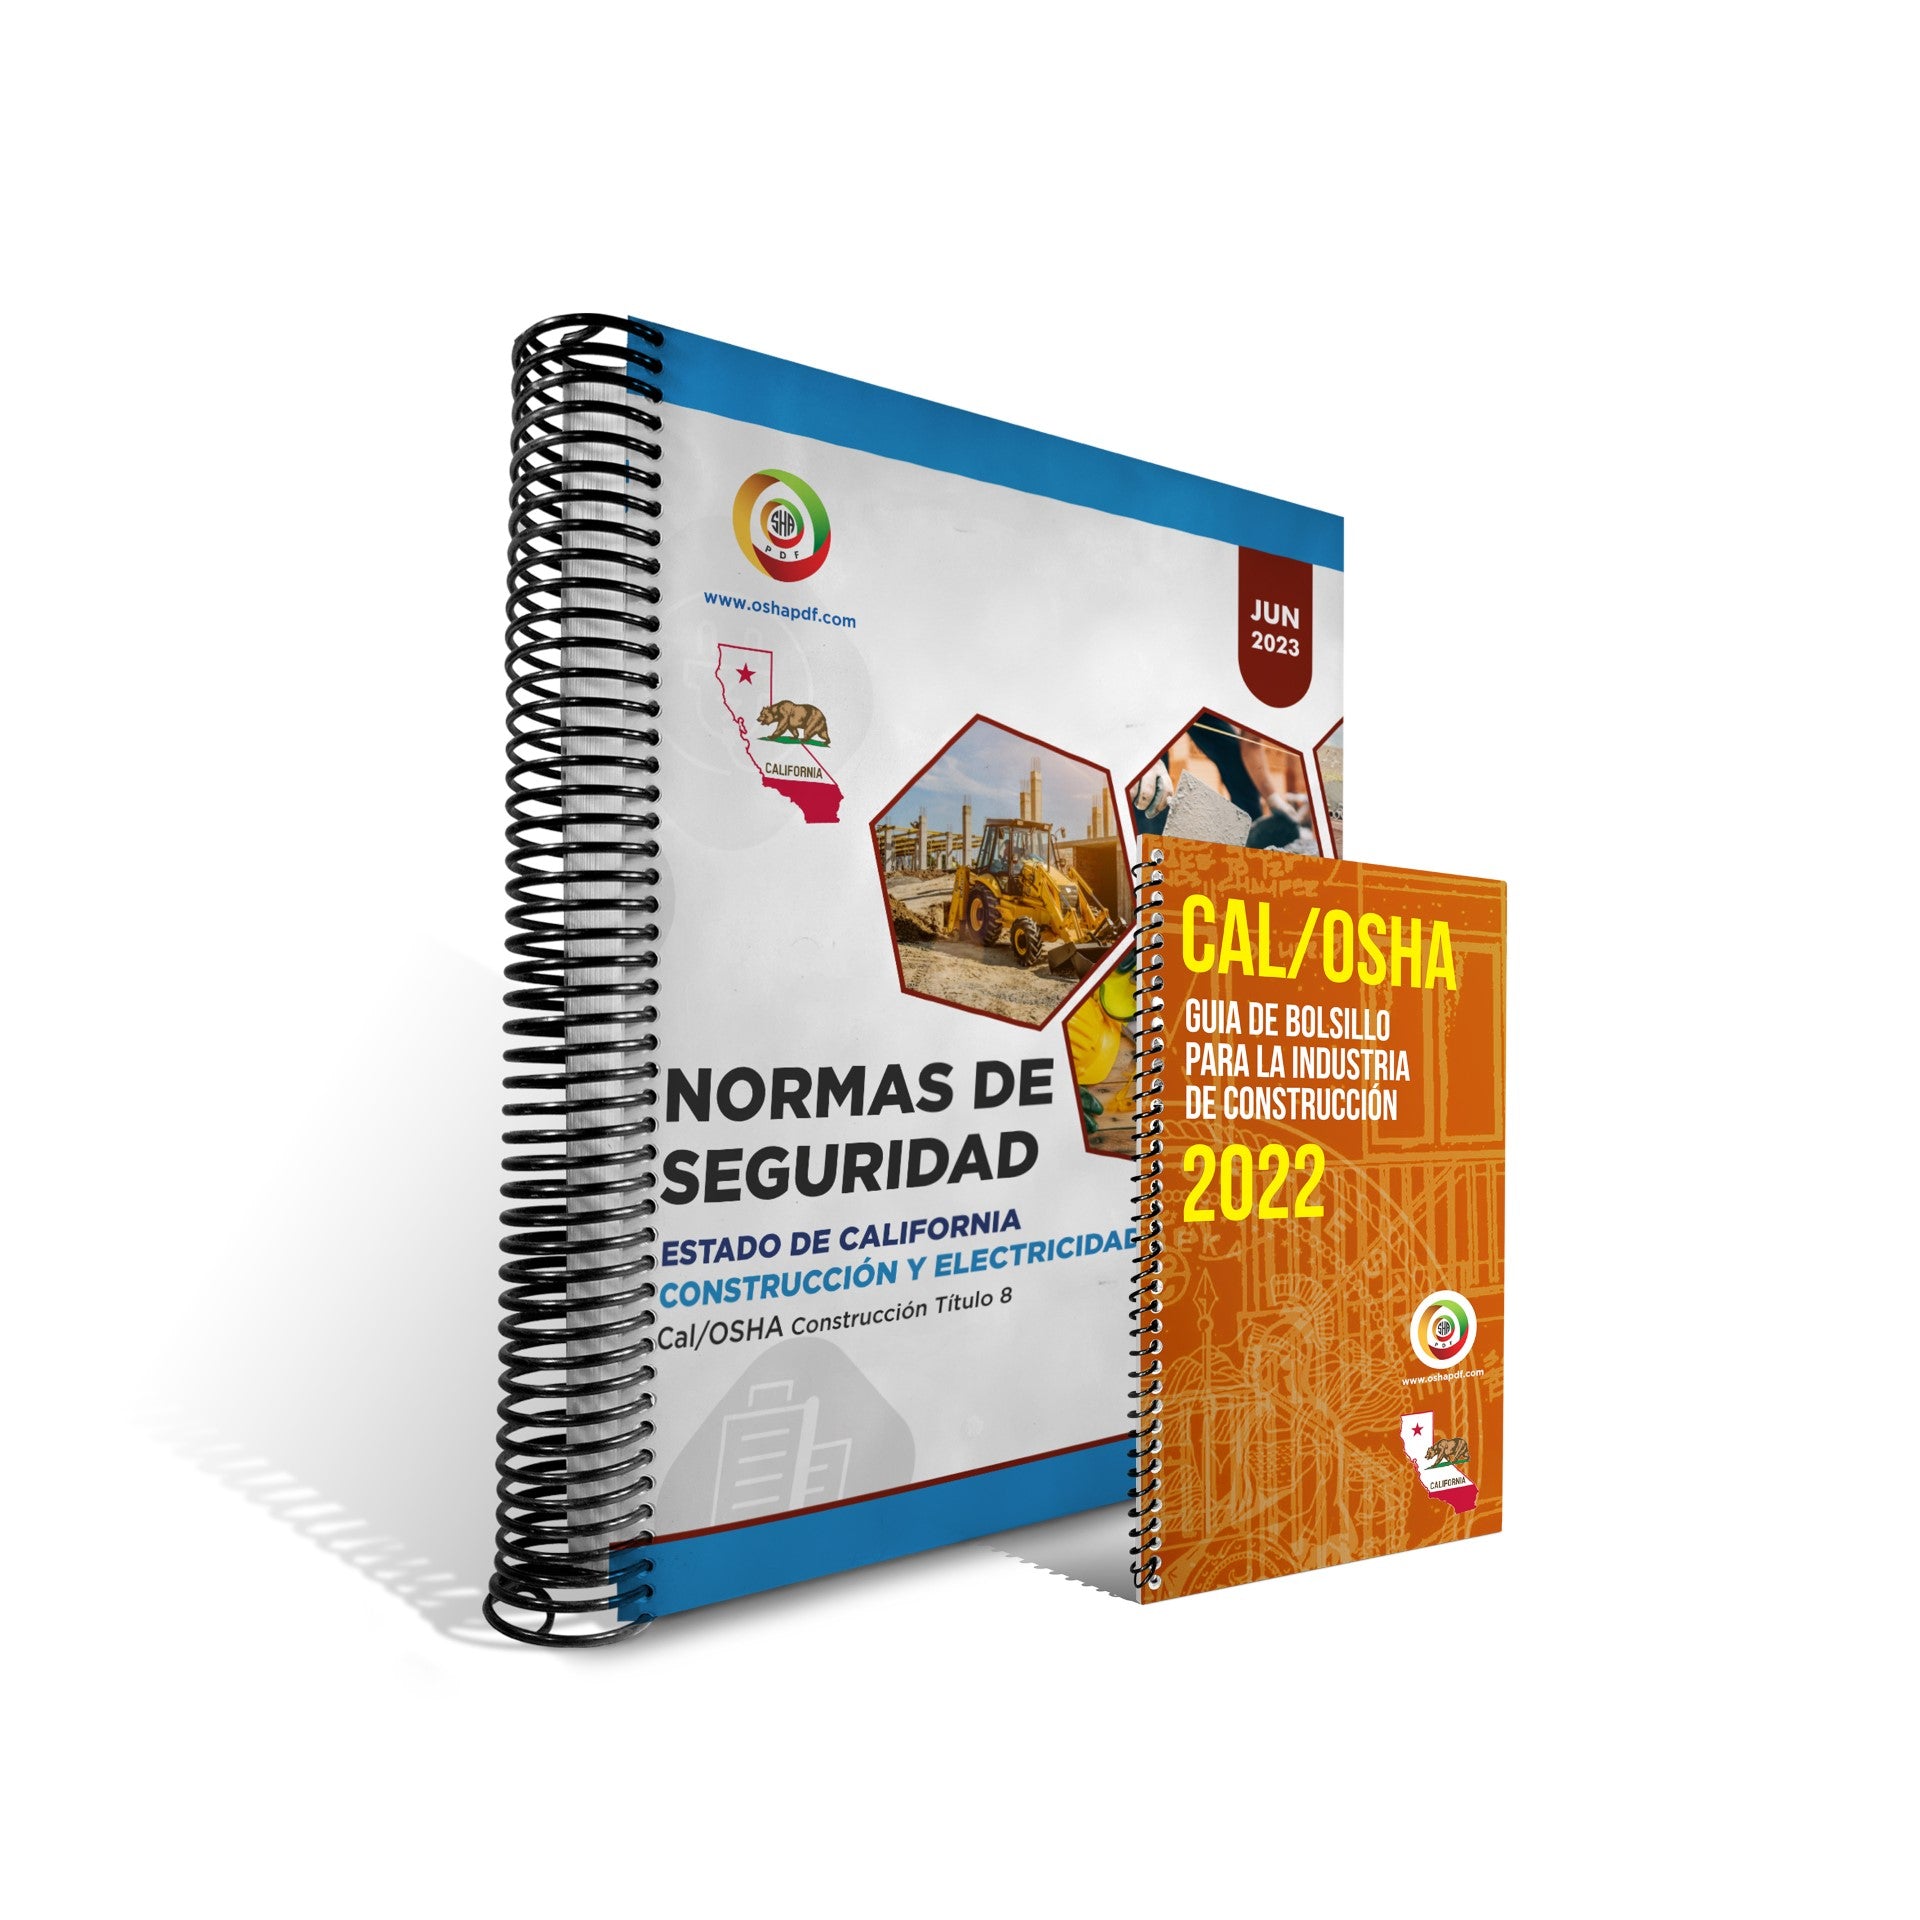 Spanish Cal/OSHA Construction Industry June 2023 Book and Pocket Guide Combo